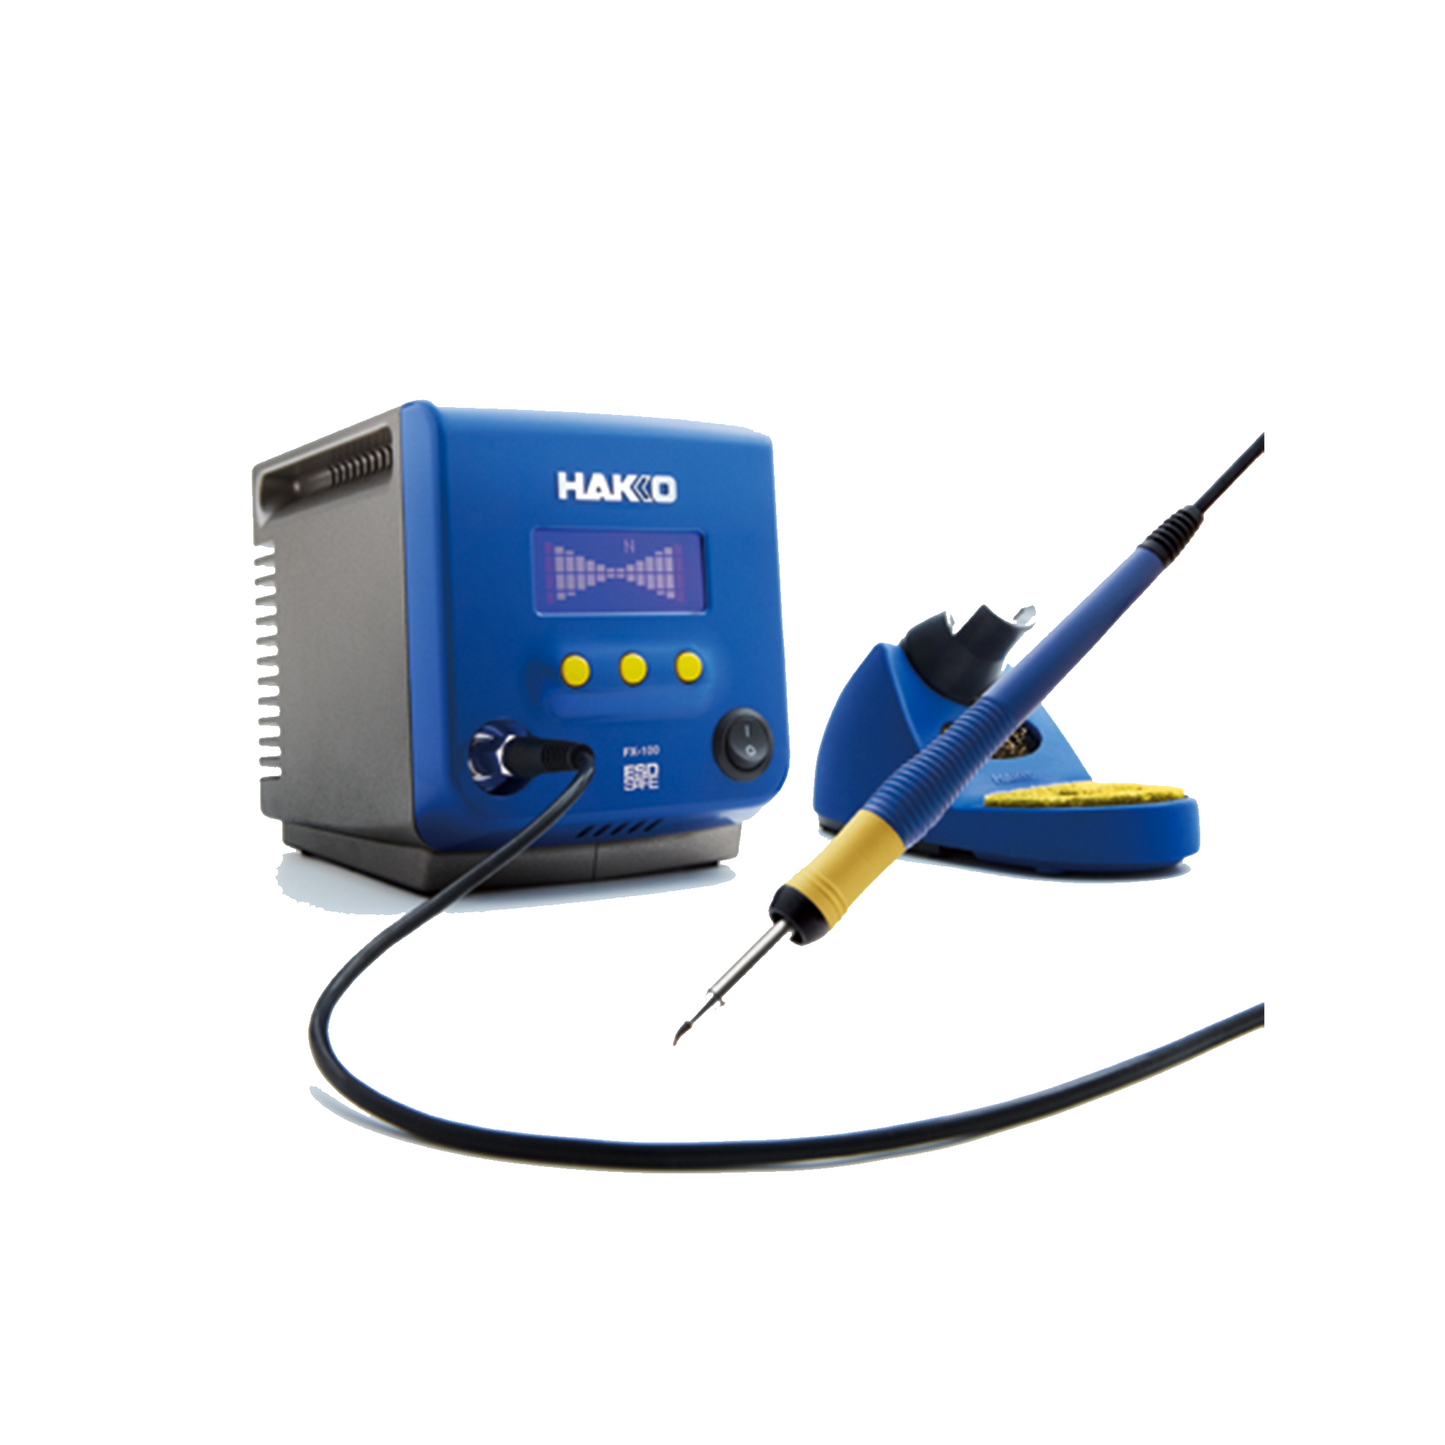 Hakko FX100 Soldering Station 85W with induction heater soldering iron tip for PCB assembly production process